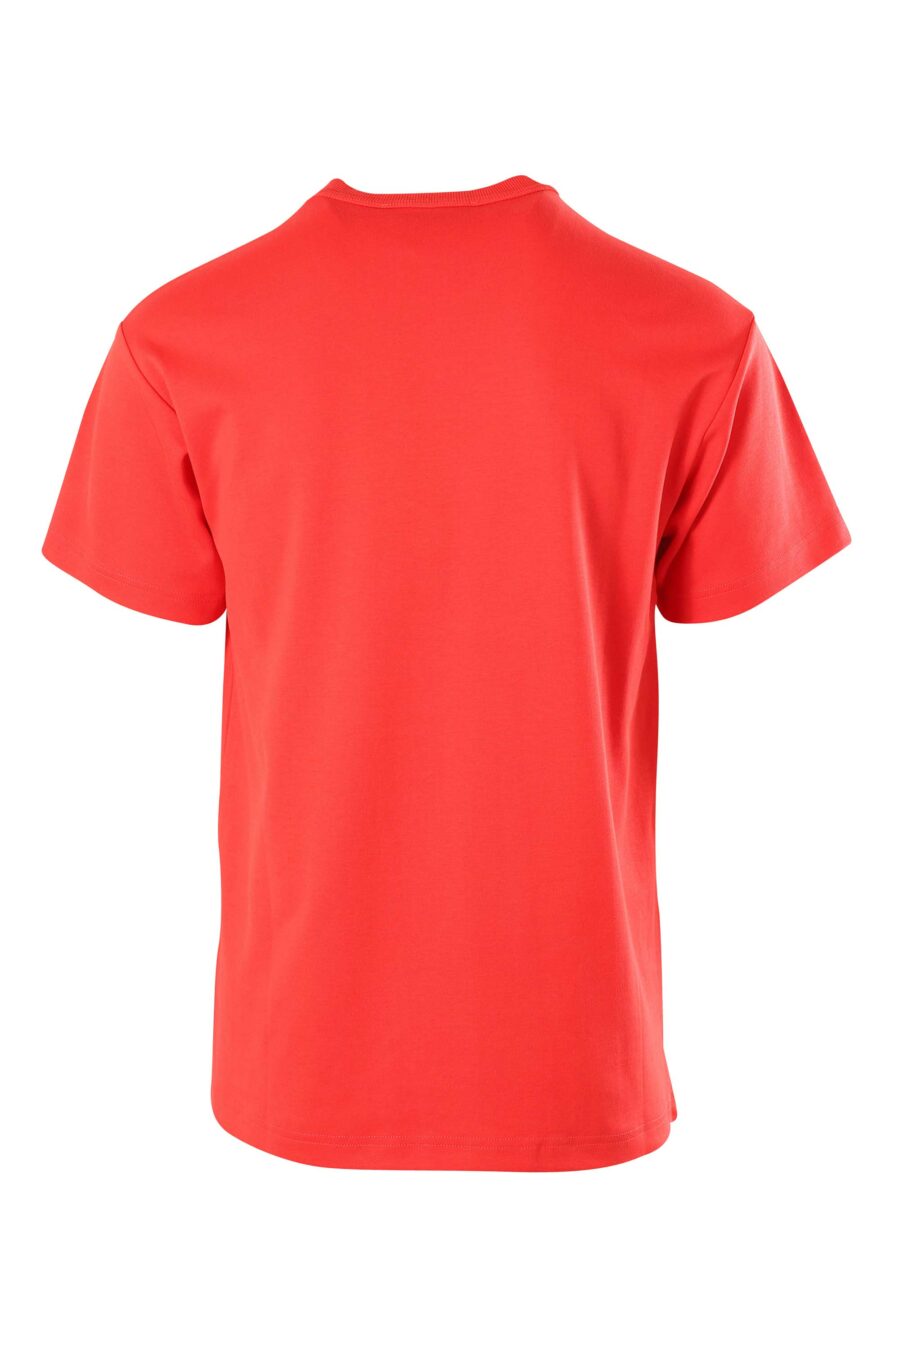 Red T-shirt with double interlaced logo - 8052019234886 2